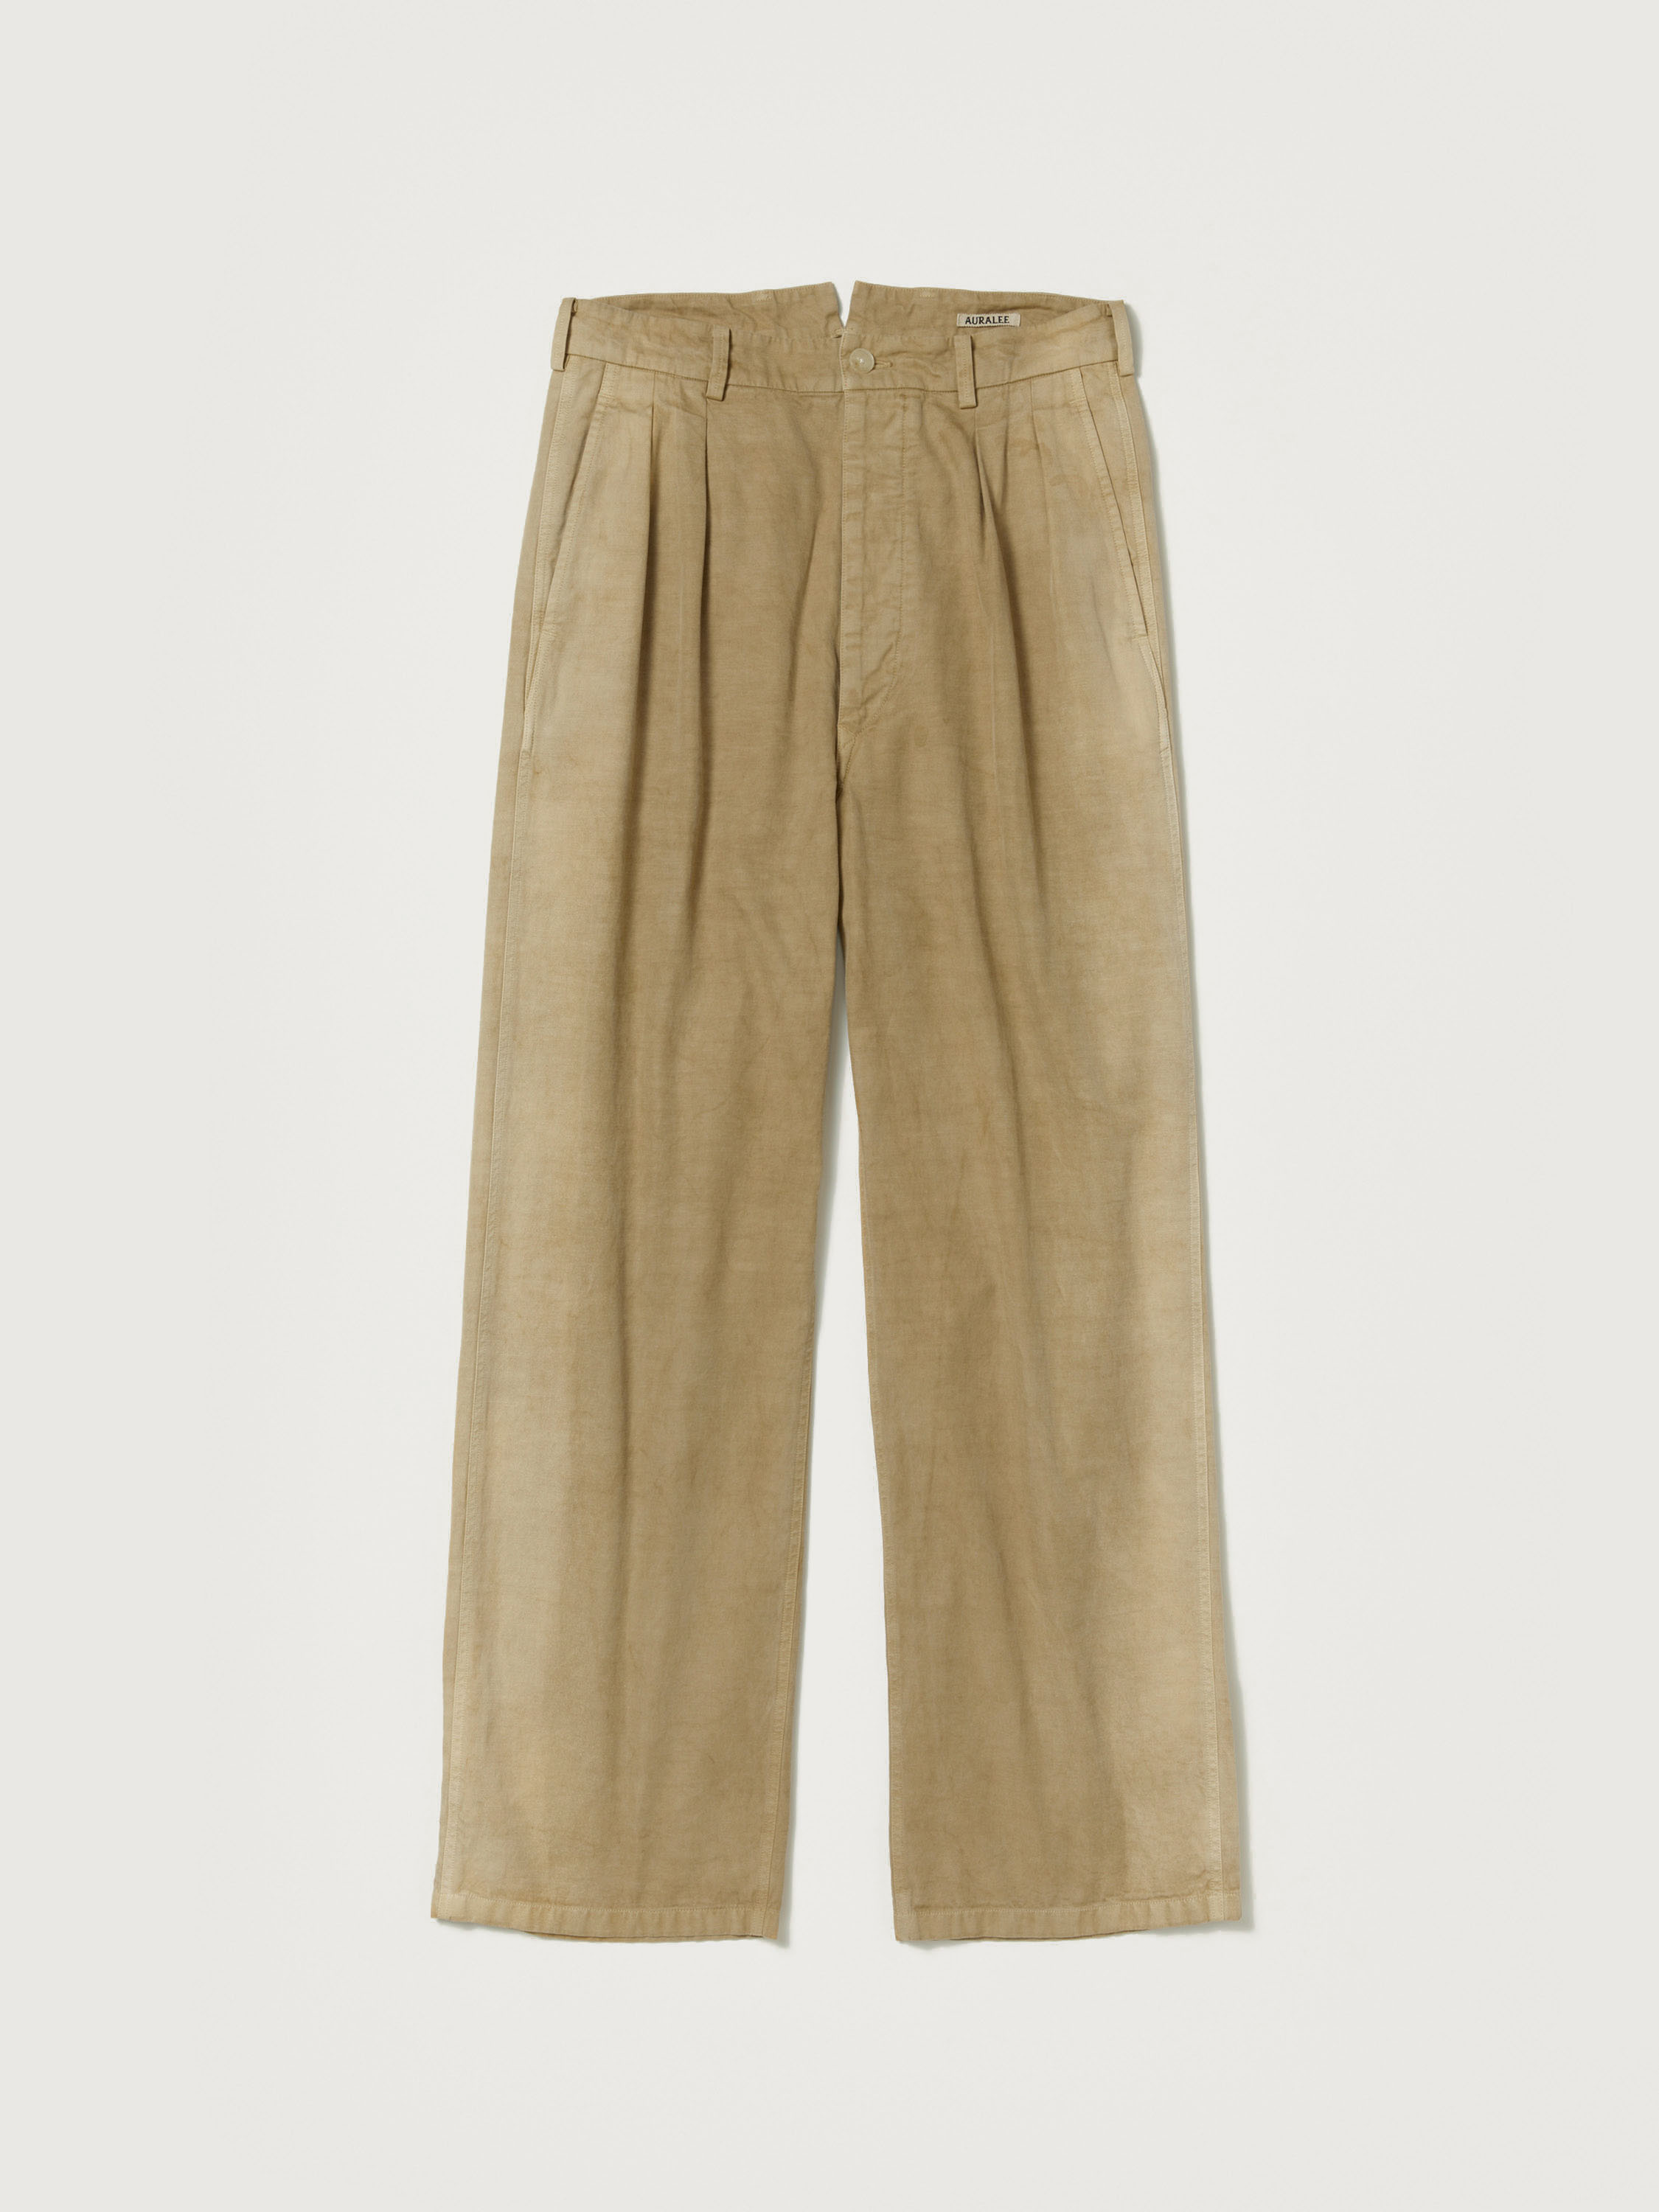 FINX NATURAL GABARDINE PRODUCT DYED PANTS 詳細画像 FADE BEIGE 4